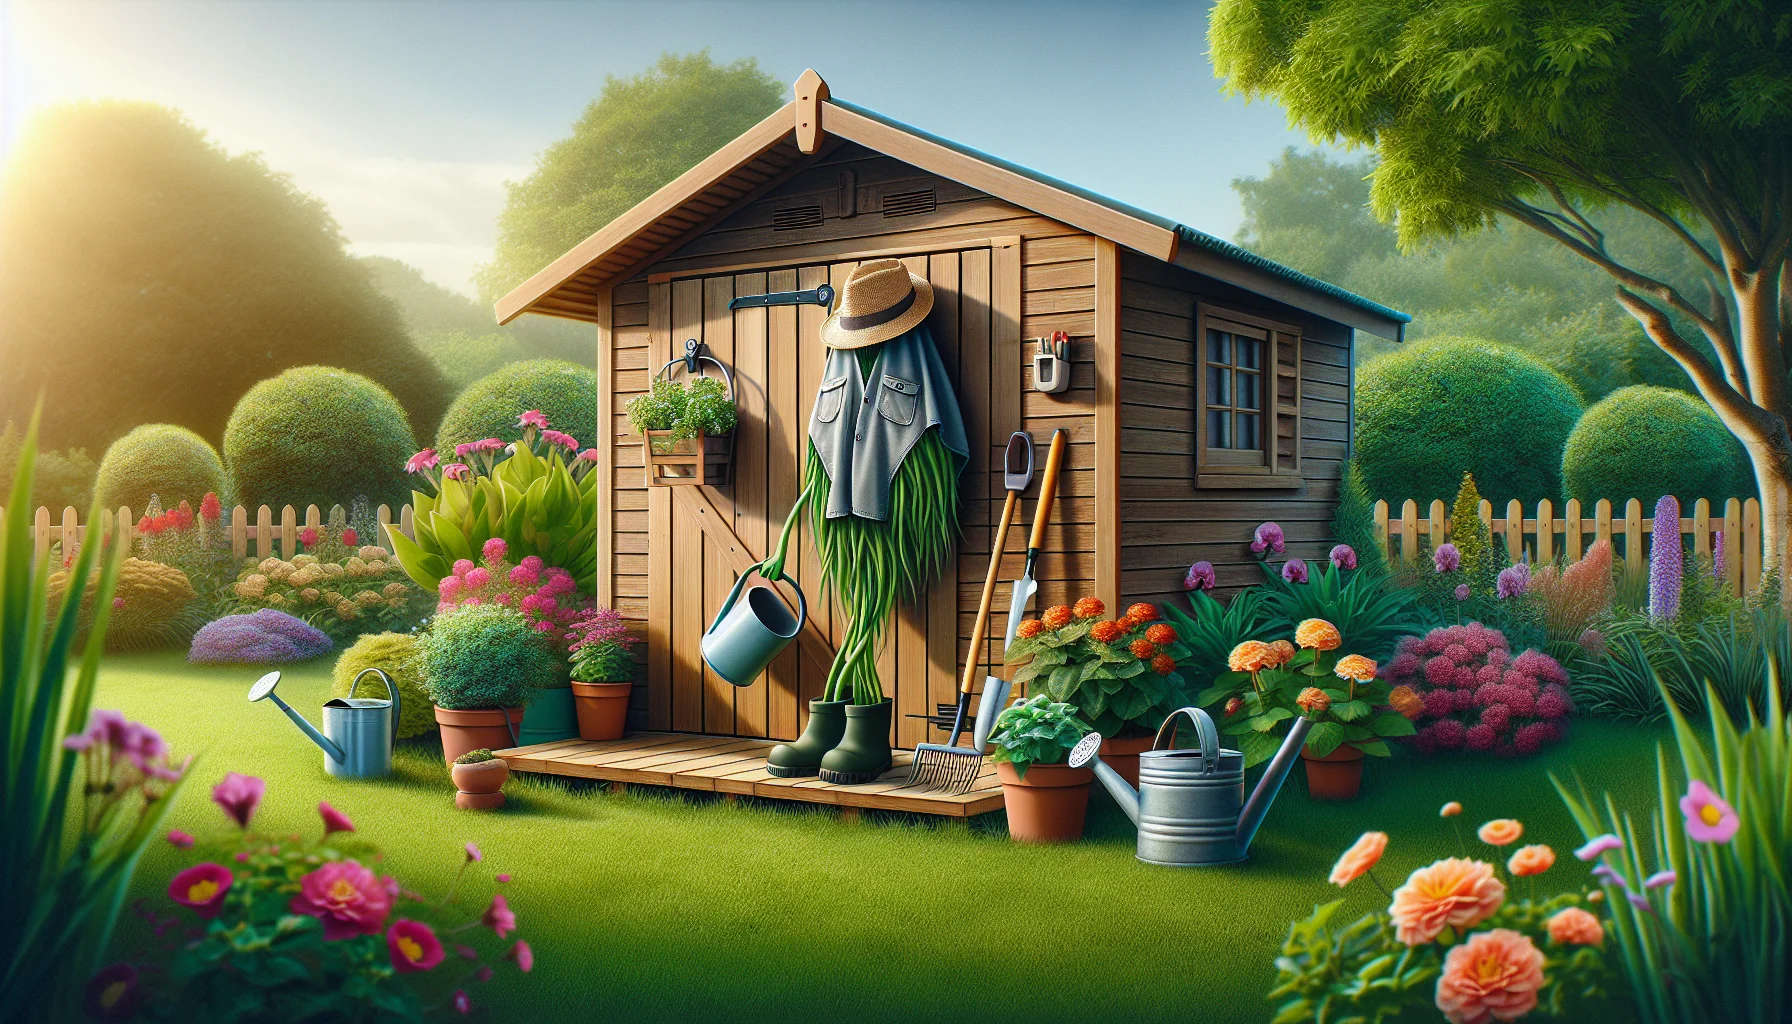 Illustrate a delightful and hilarious scene of a garden shed with an attached porch, standing amidst a lush green lawn. On the porch, picture a few gardening tools like a watering can, a pair of shears, and a straw hat comically arranged in such a way that they seem to be a person engaging in gardening. Around the shed display flourishing plants and beautiful, blooming flowers of different kinds, suggesting an inviting and thriving garden. The sun is shining warmly, causing a lovely interplay of shadows and light, capturing the joy and humor that comes with the activities of home gardening.